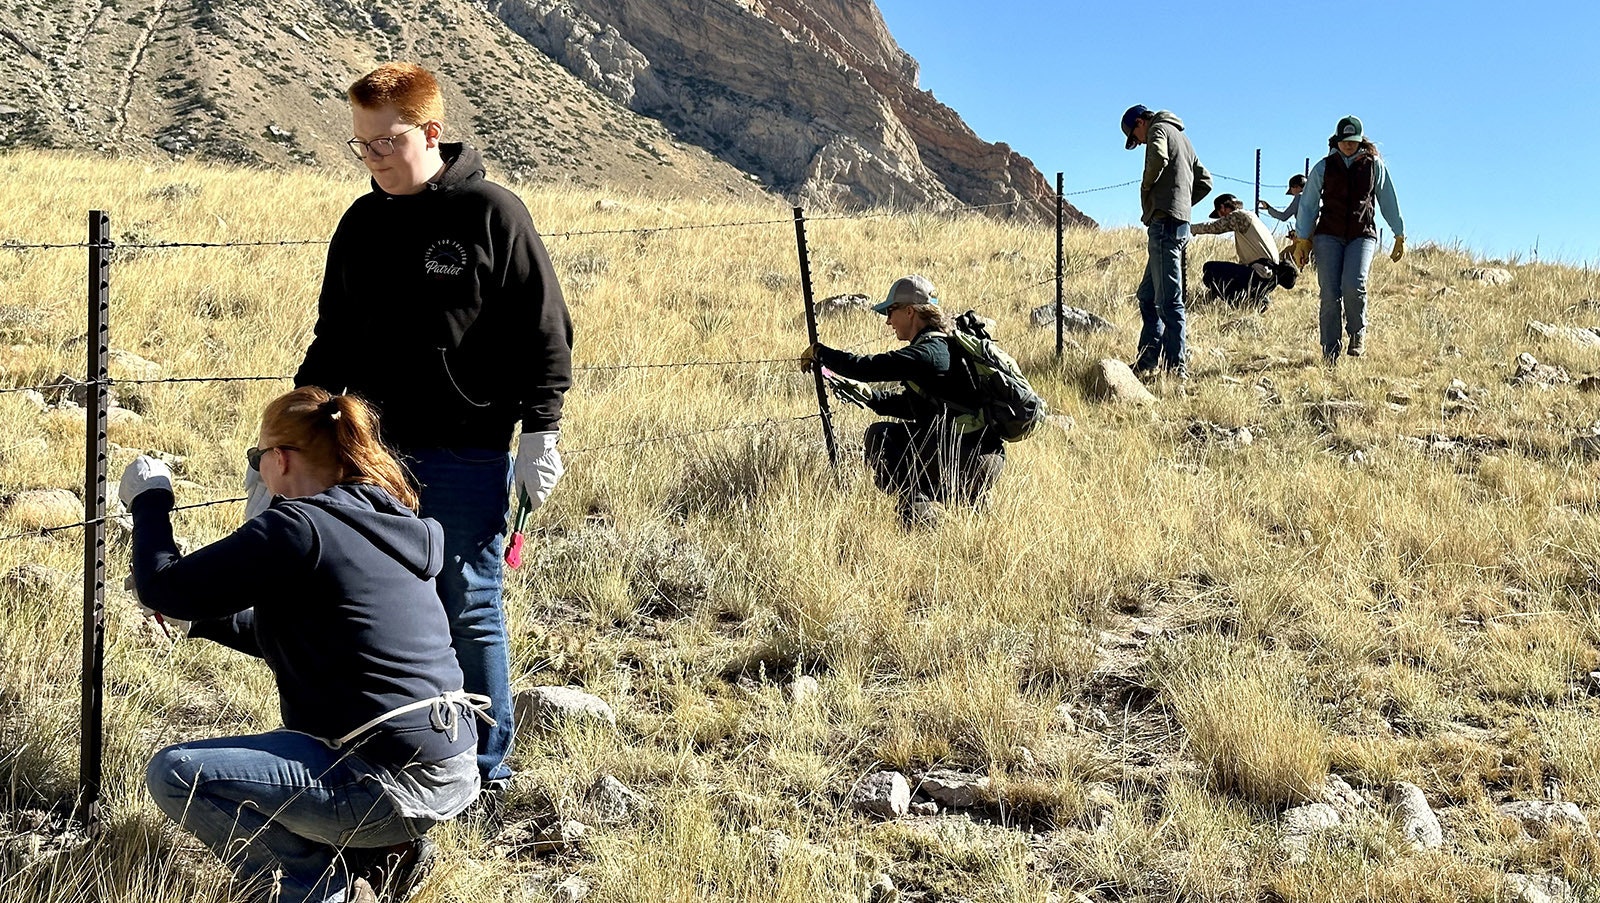 Volunteers of all ages in the Clarks Fork Canyon. Since the Absaroka Fence Initiative started in 2020, over 25 miles of fencing in Park County has been removed or modified. Over 2,000 volunteer hours have been donated to make this progress possible.